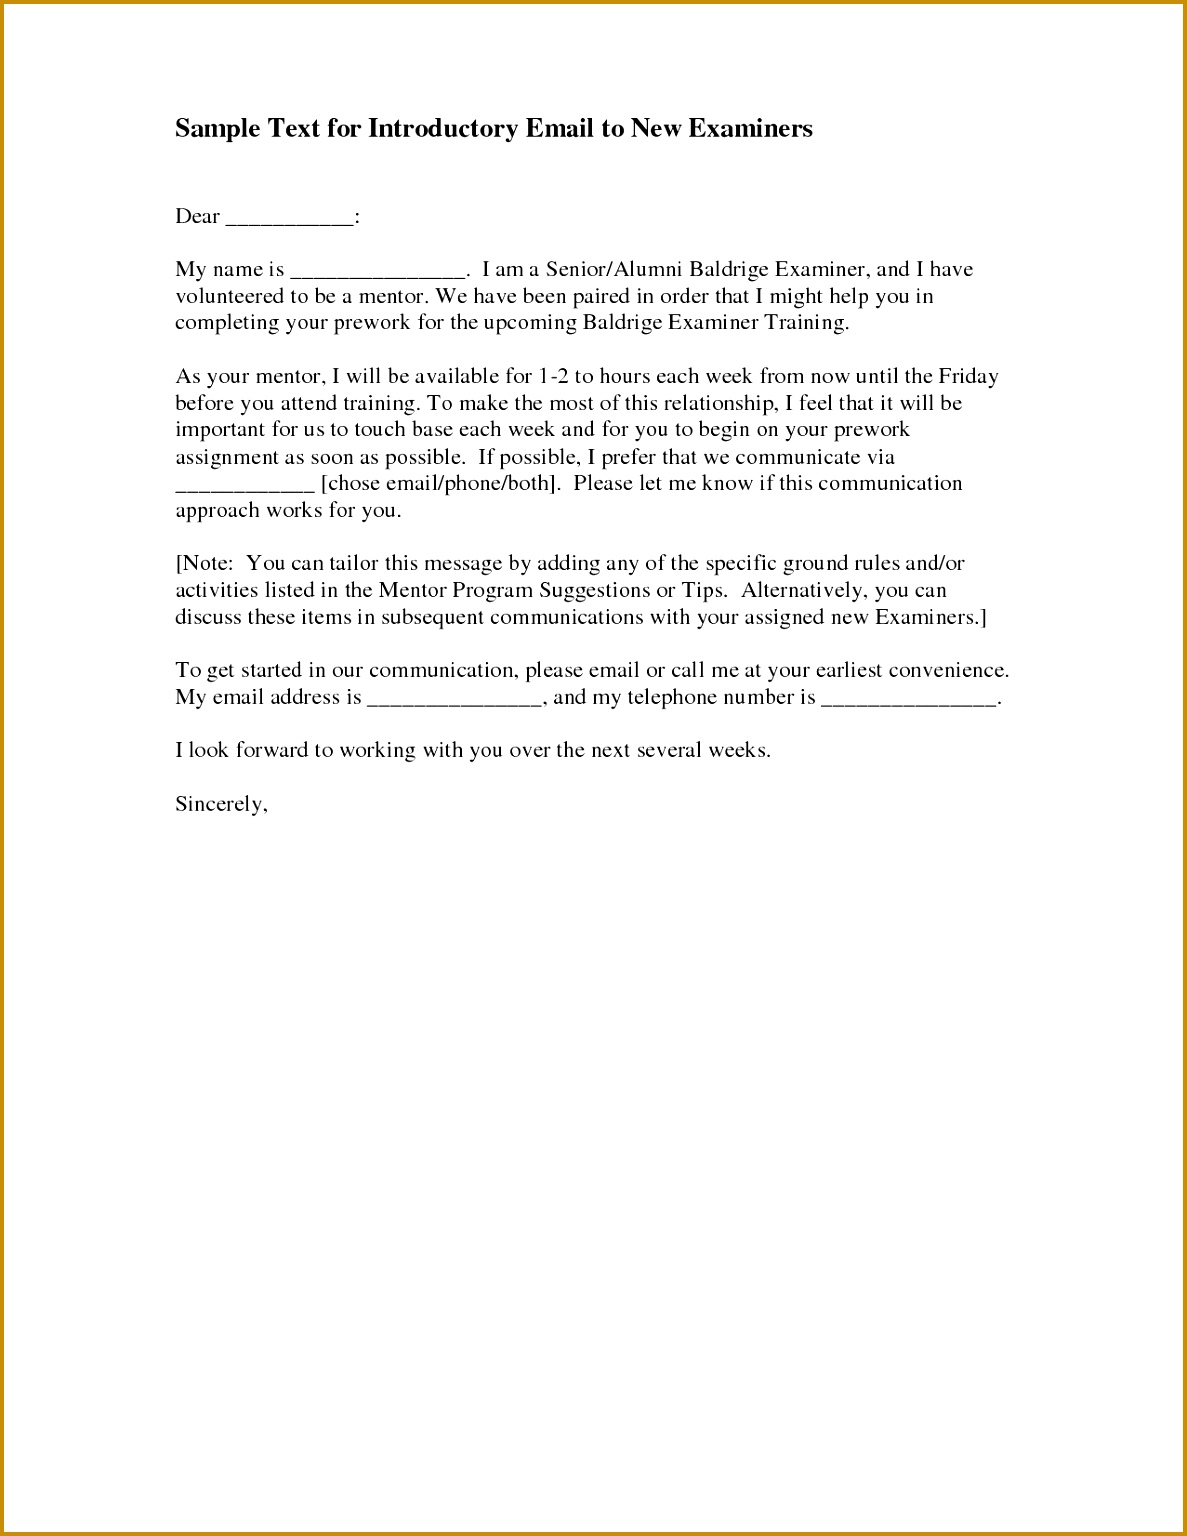 6 self introduction email sample memo formats 15361187